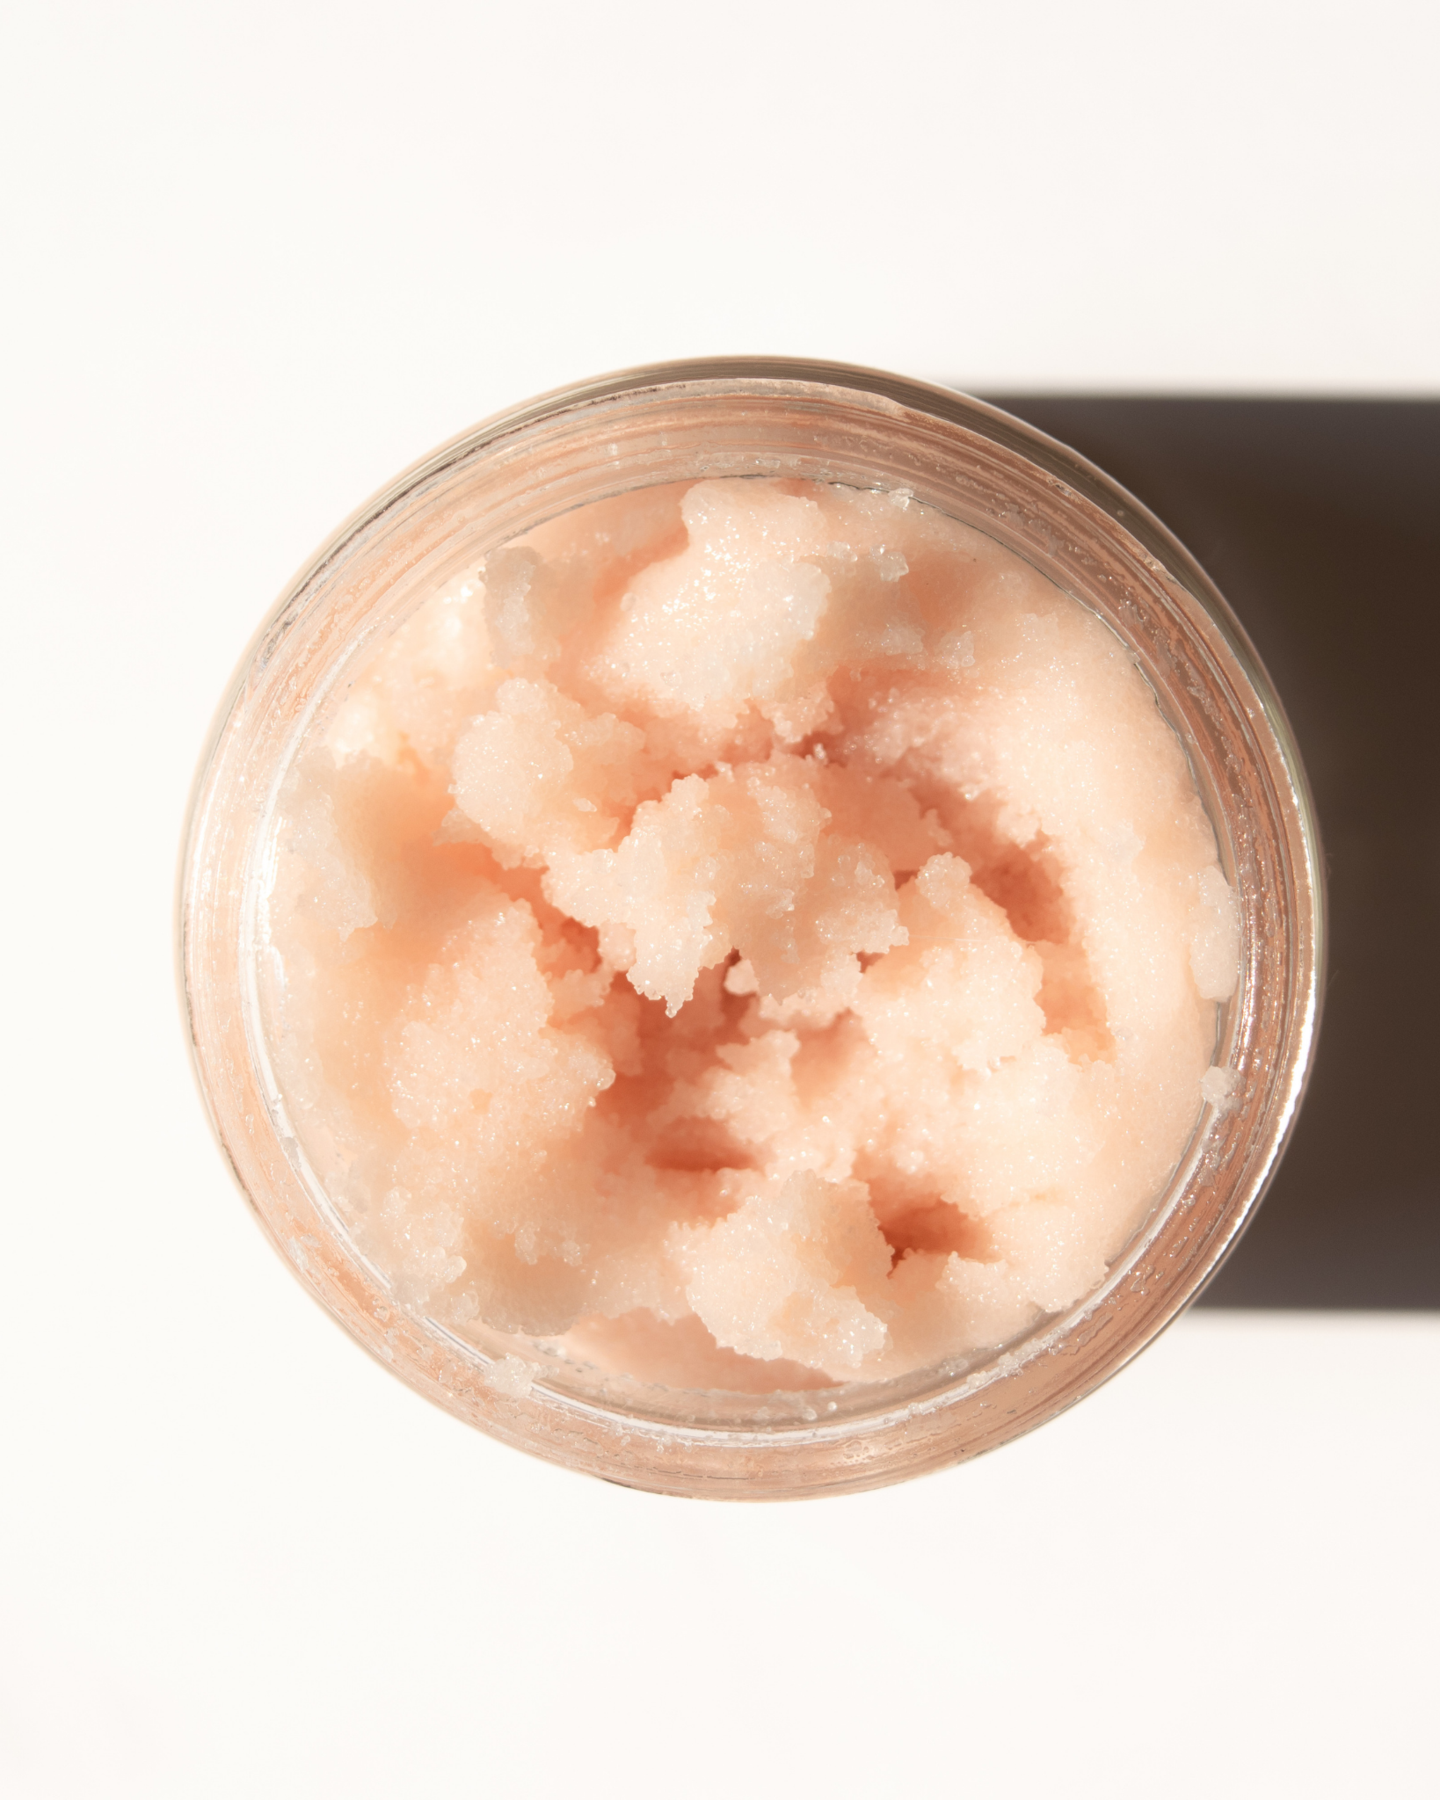 Body Scrub - Soothe Rose & Coconut